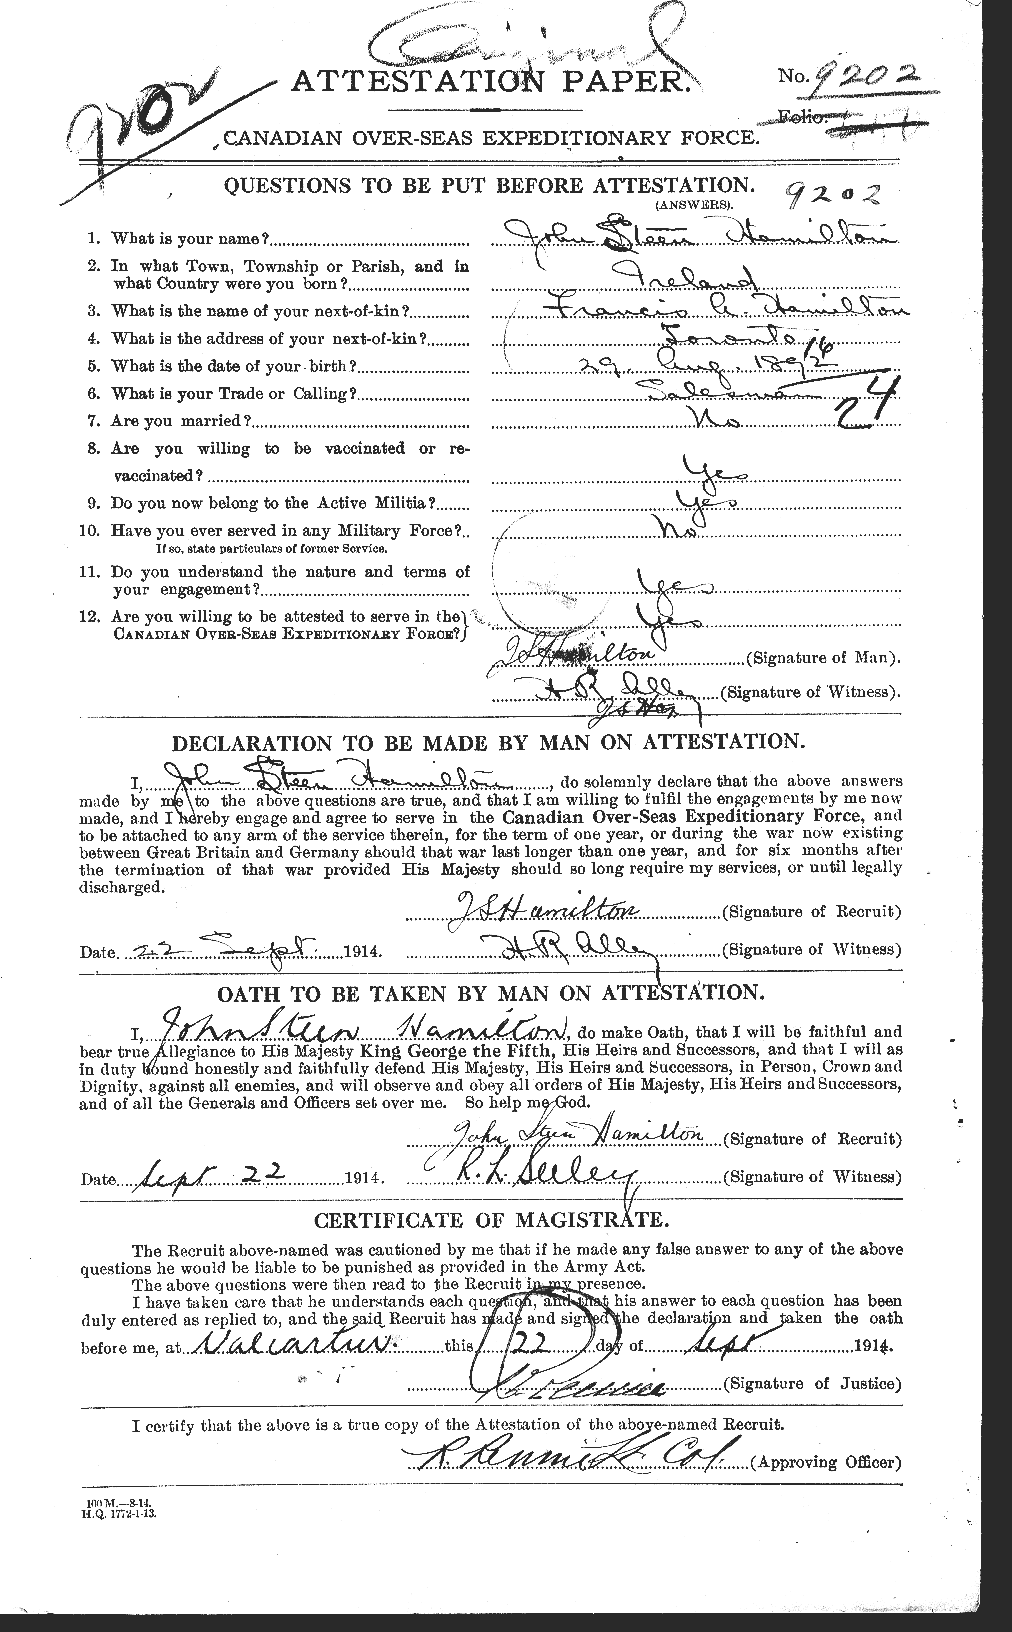 Personnel Records of the First World War - CEF 373124a